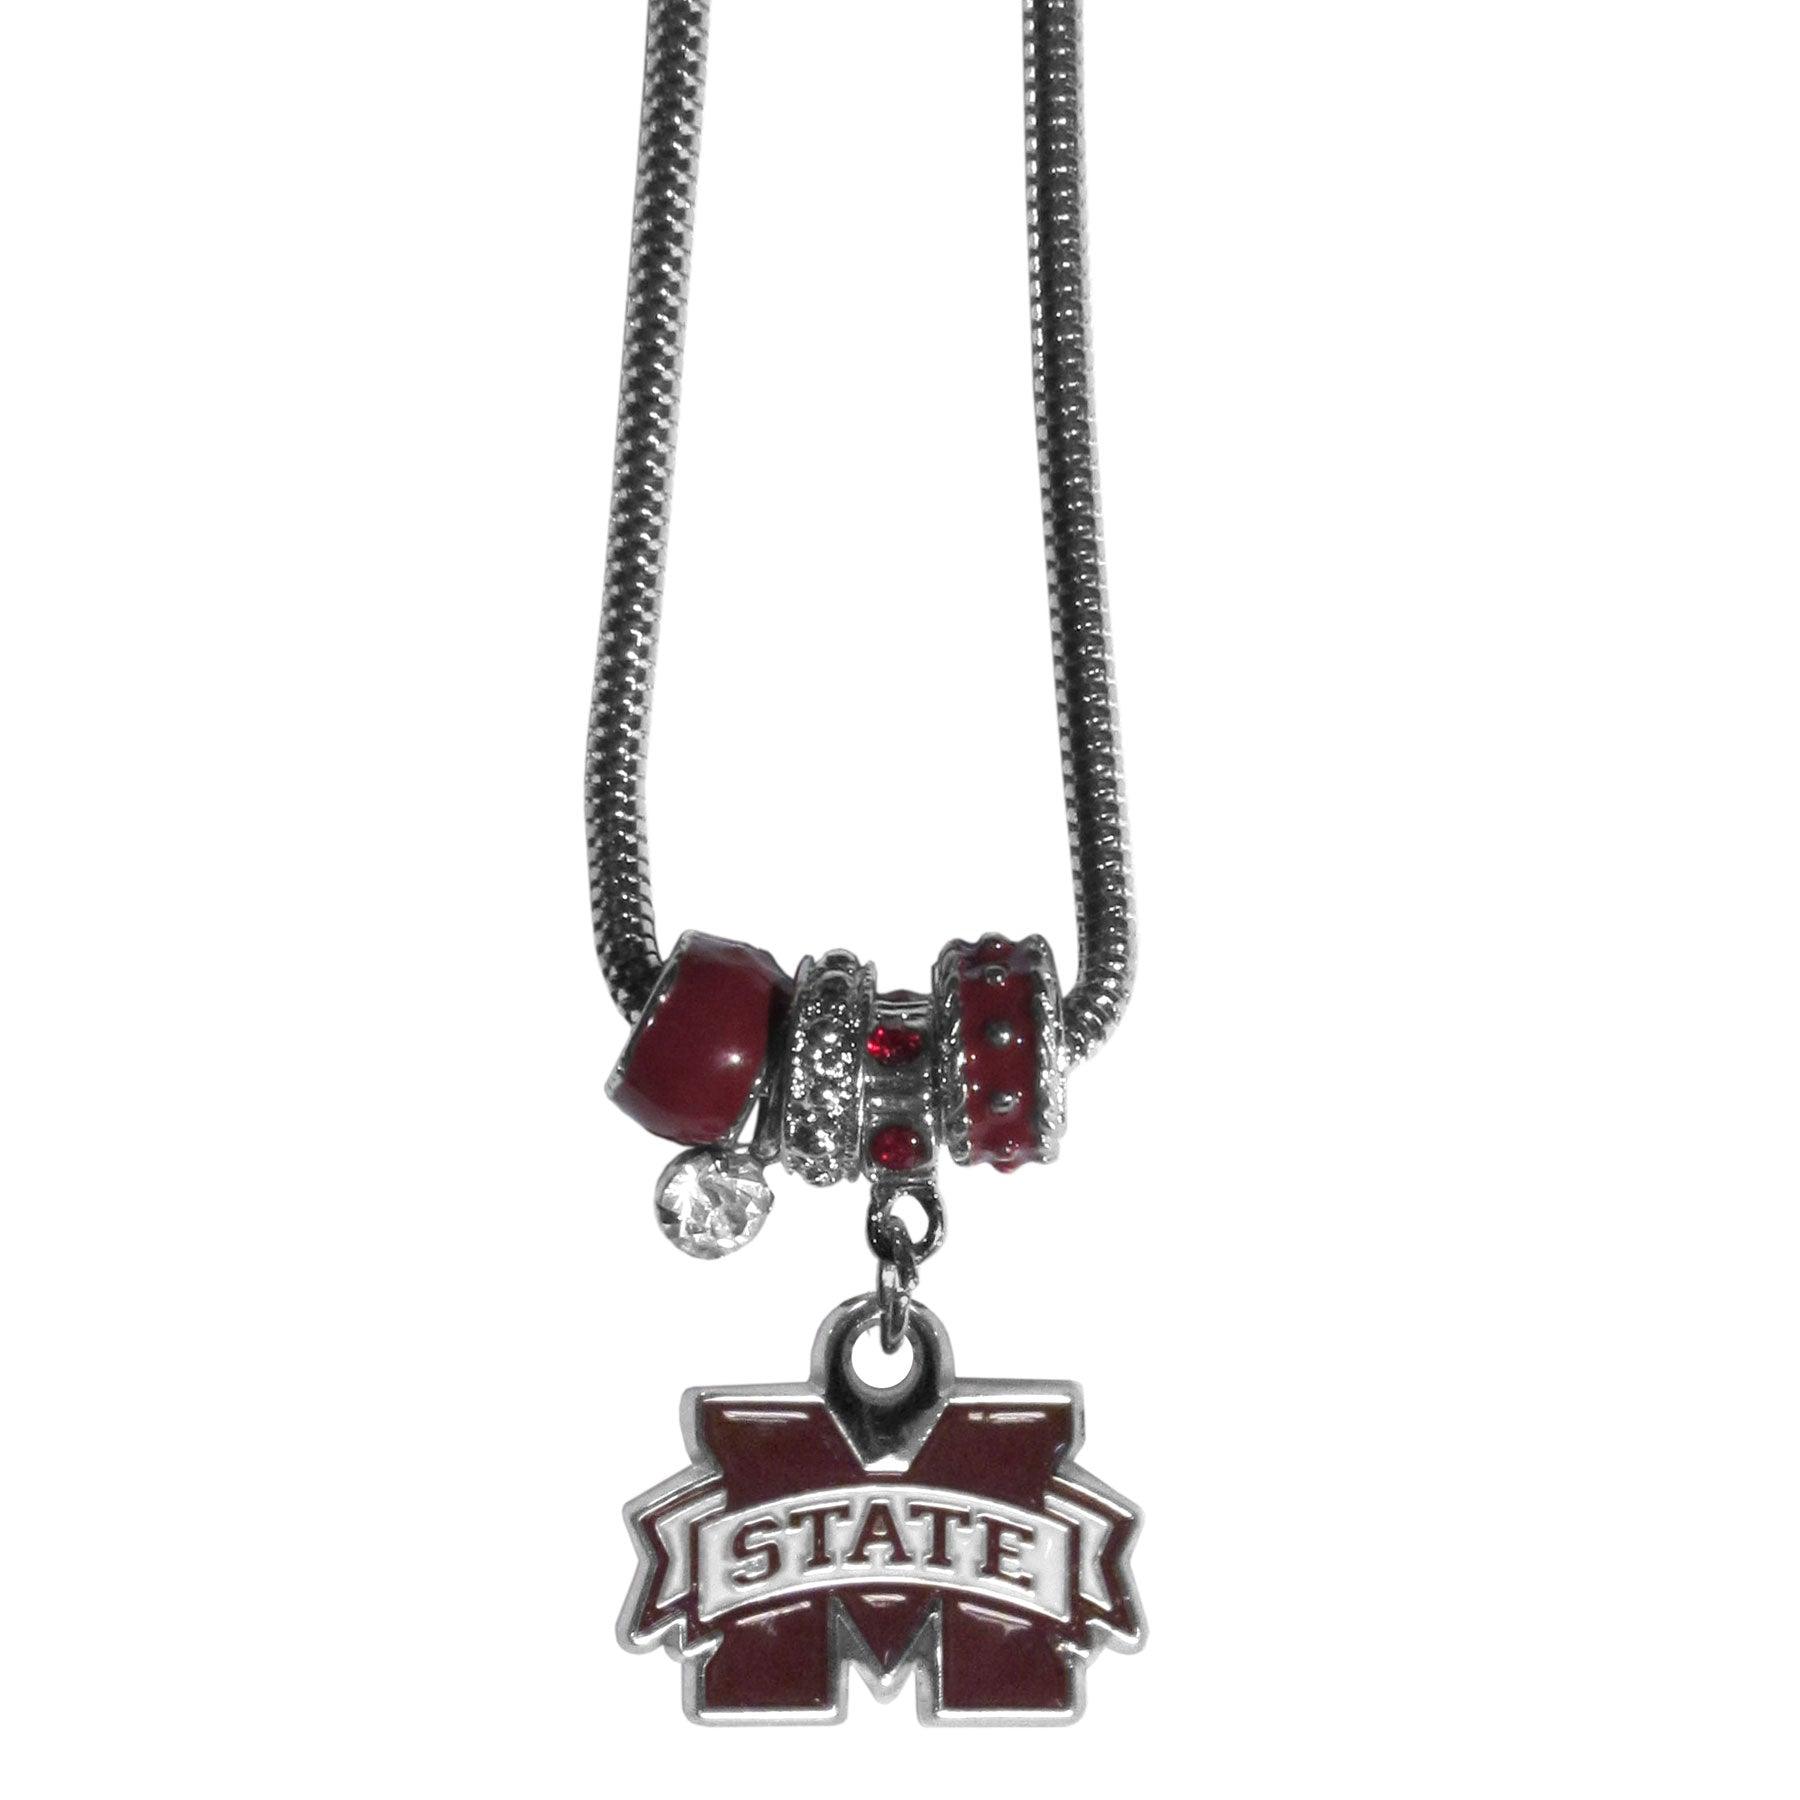  NHL Siskiyou Sports Fan Shop Philadelphia Flyers Chain  Necklace with Small Charm 22 inch Team Color : Sports & Outdoors